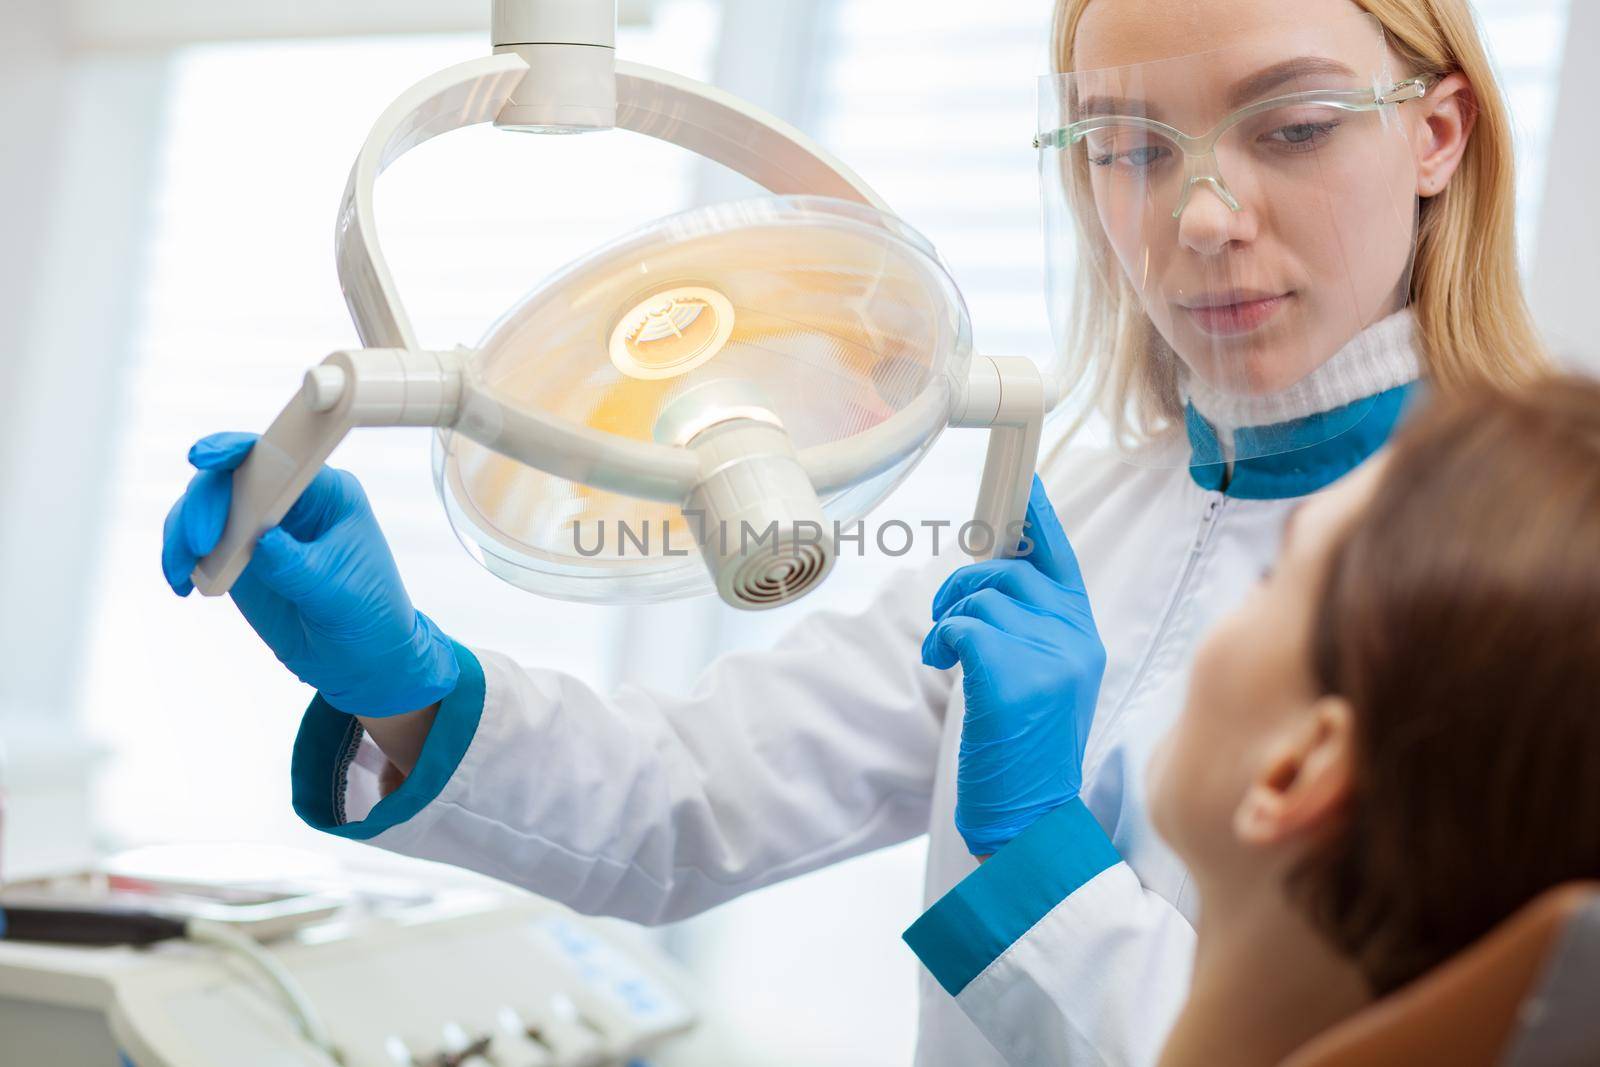 Attractive female dentist adjusting dental lamp, preparing to examine teeth of her patient. Professional dentist working at her clinic. Woman visiting dentist for teeth examination. Profession concept